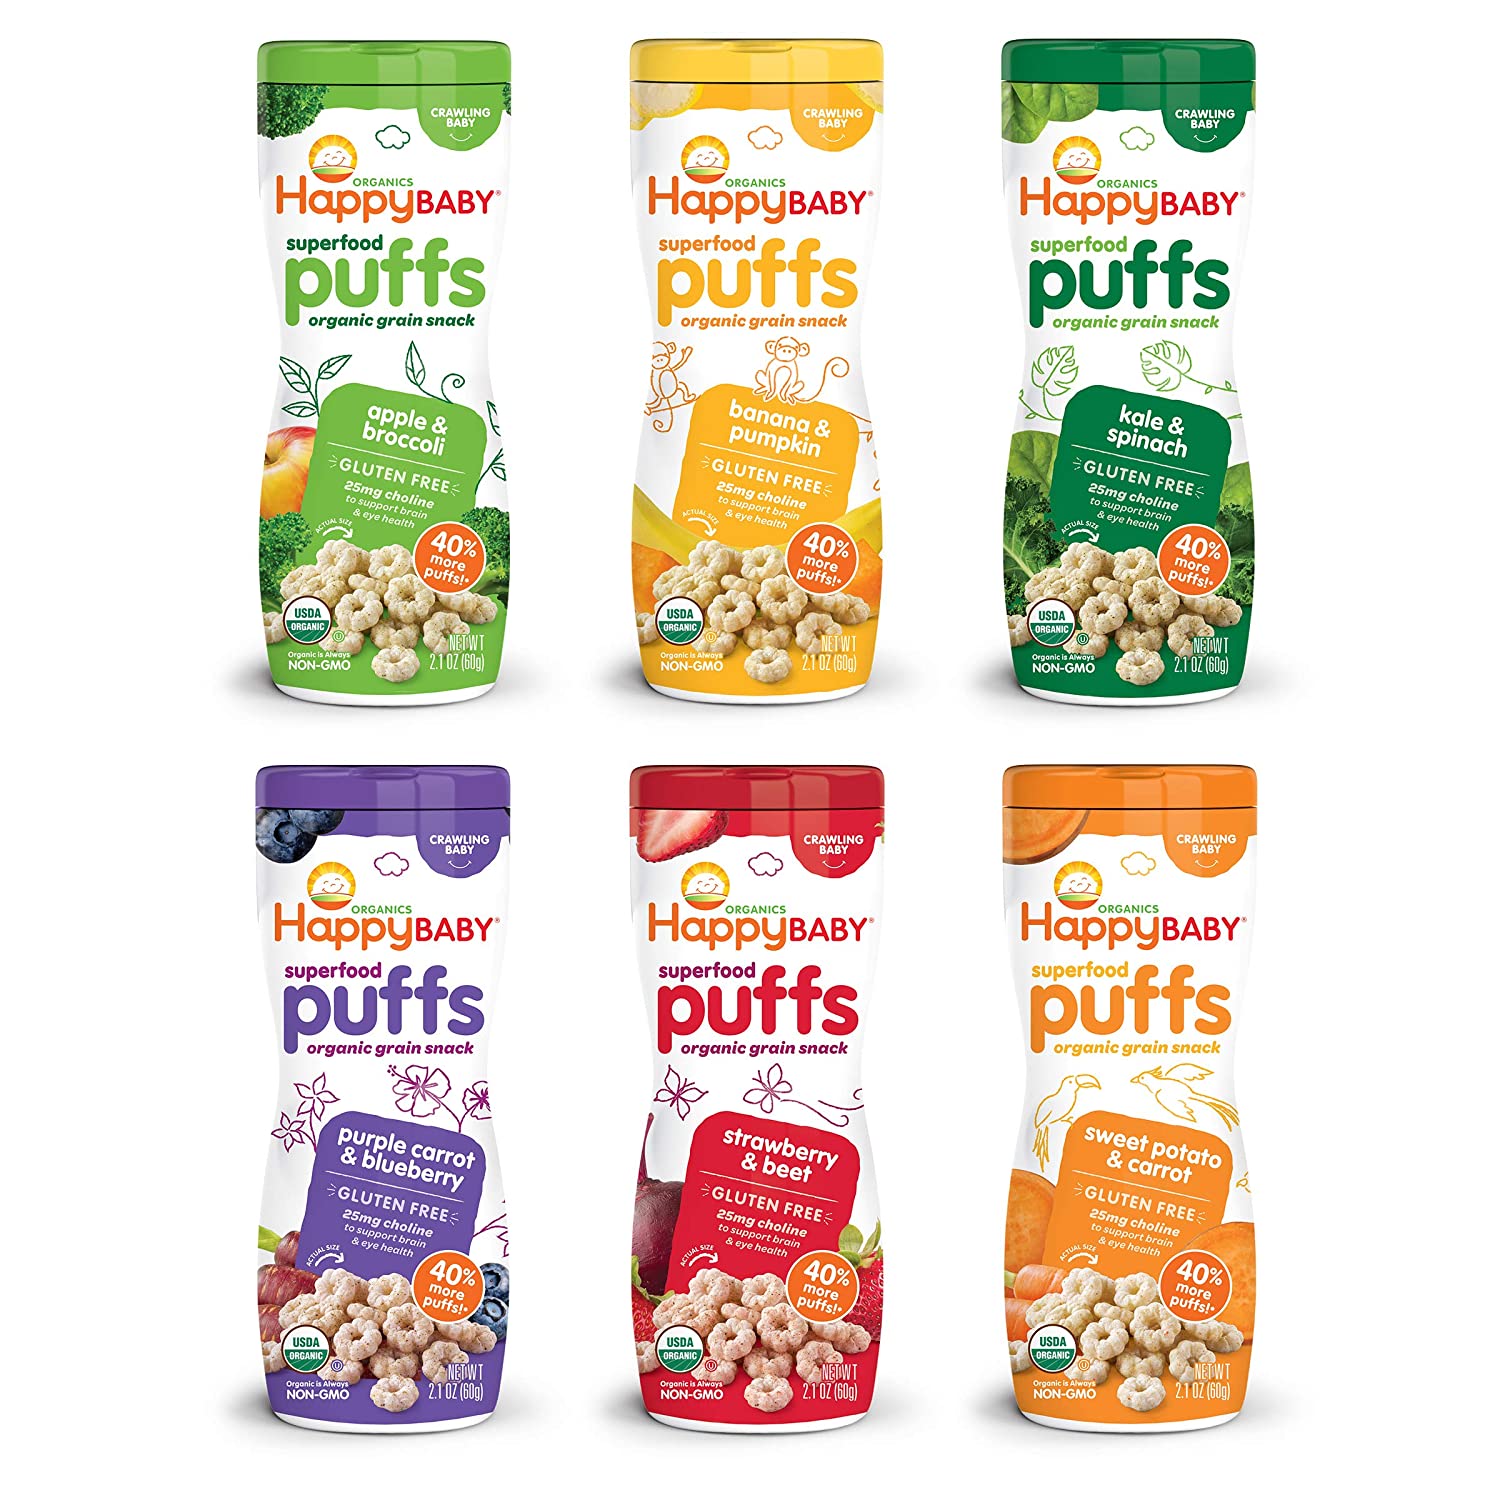 Happy Baby Organic Superfood Puffs 